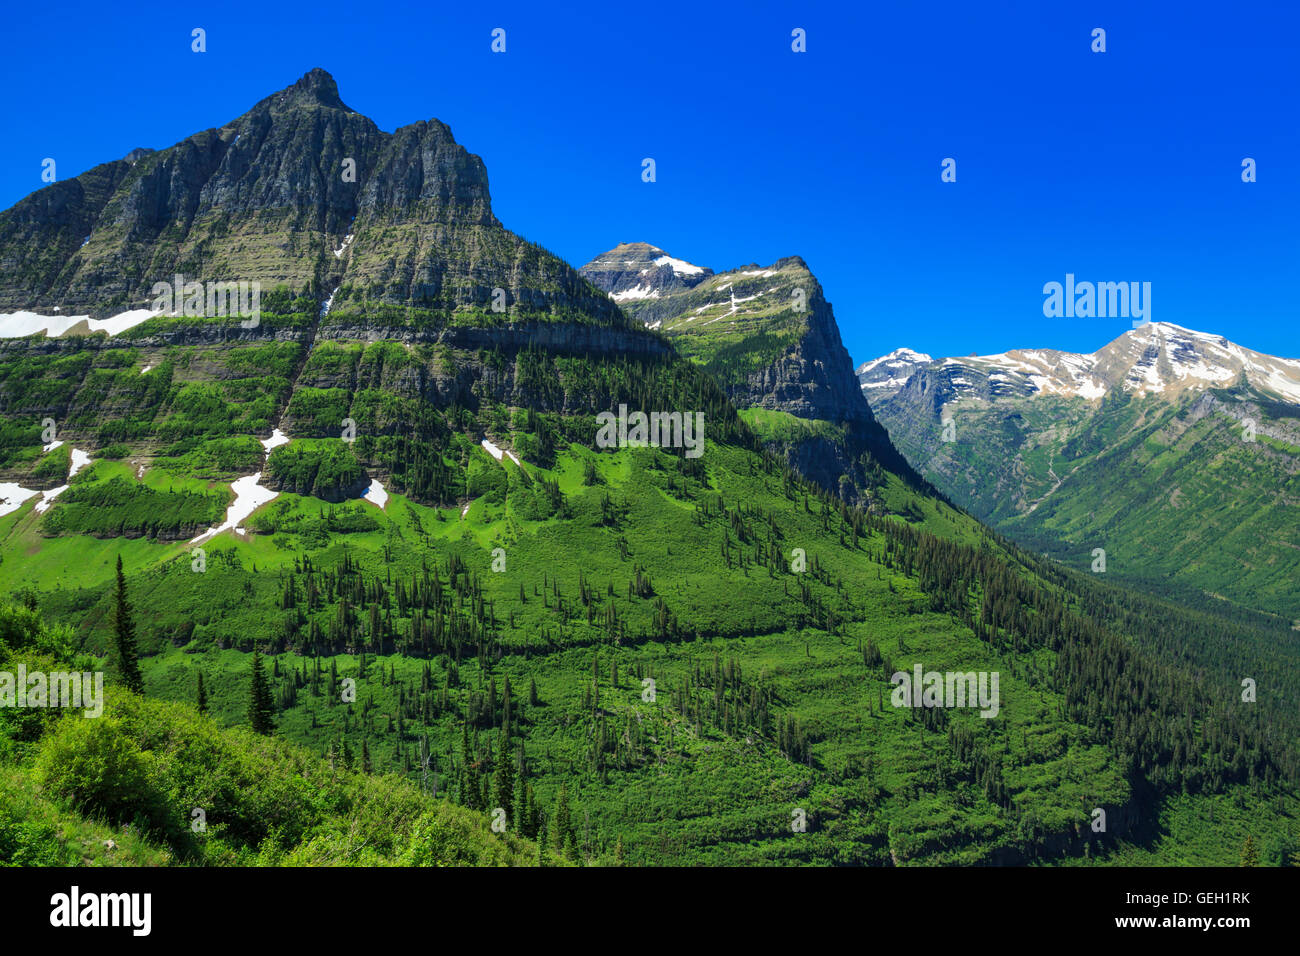 clements mountain, mount cannon, and heavens peak in glacier national park, montana Stock Photo